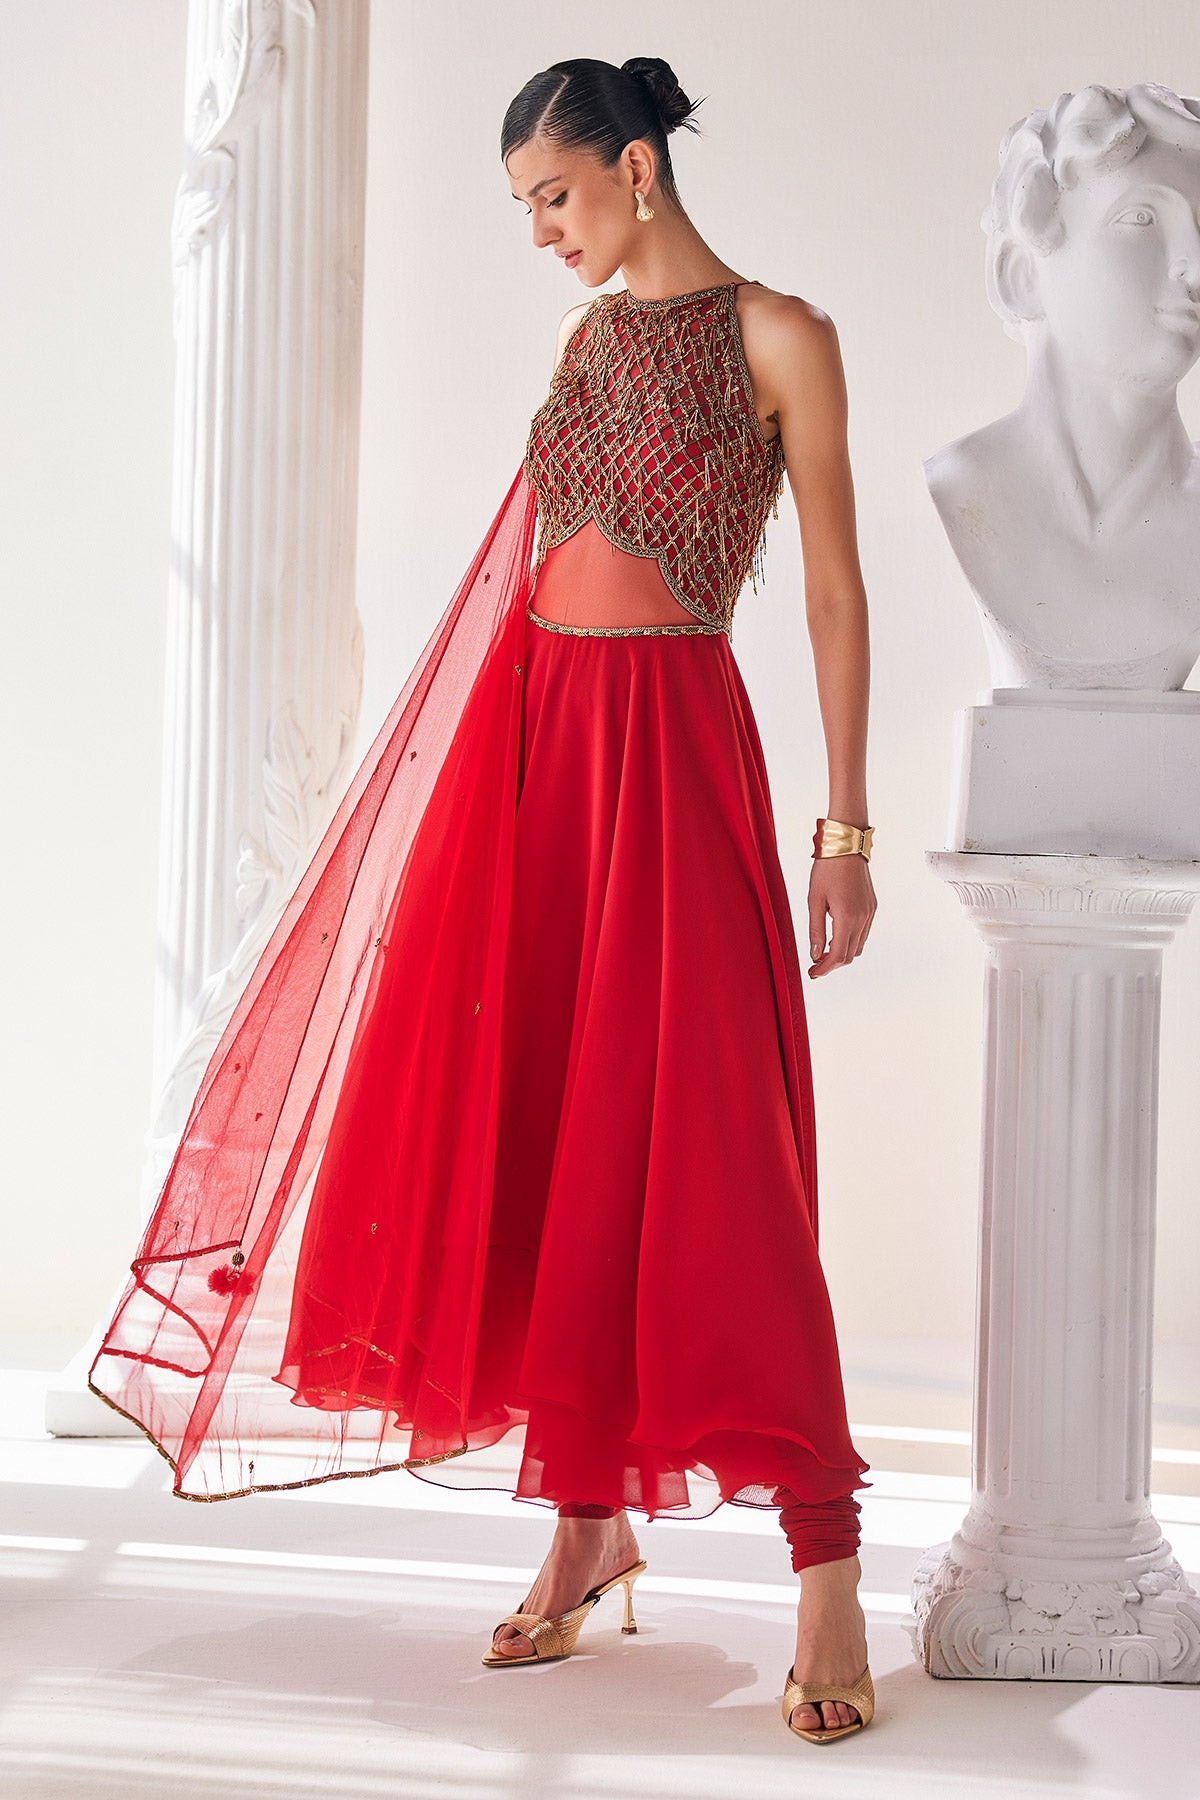 Red Georgette High Low Anarkali Designed With An Emroidered Bodice Paired With A Churidar And A Net Dupatta.